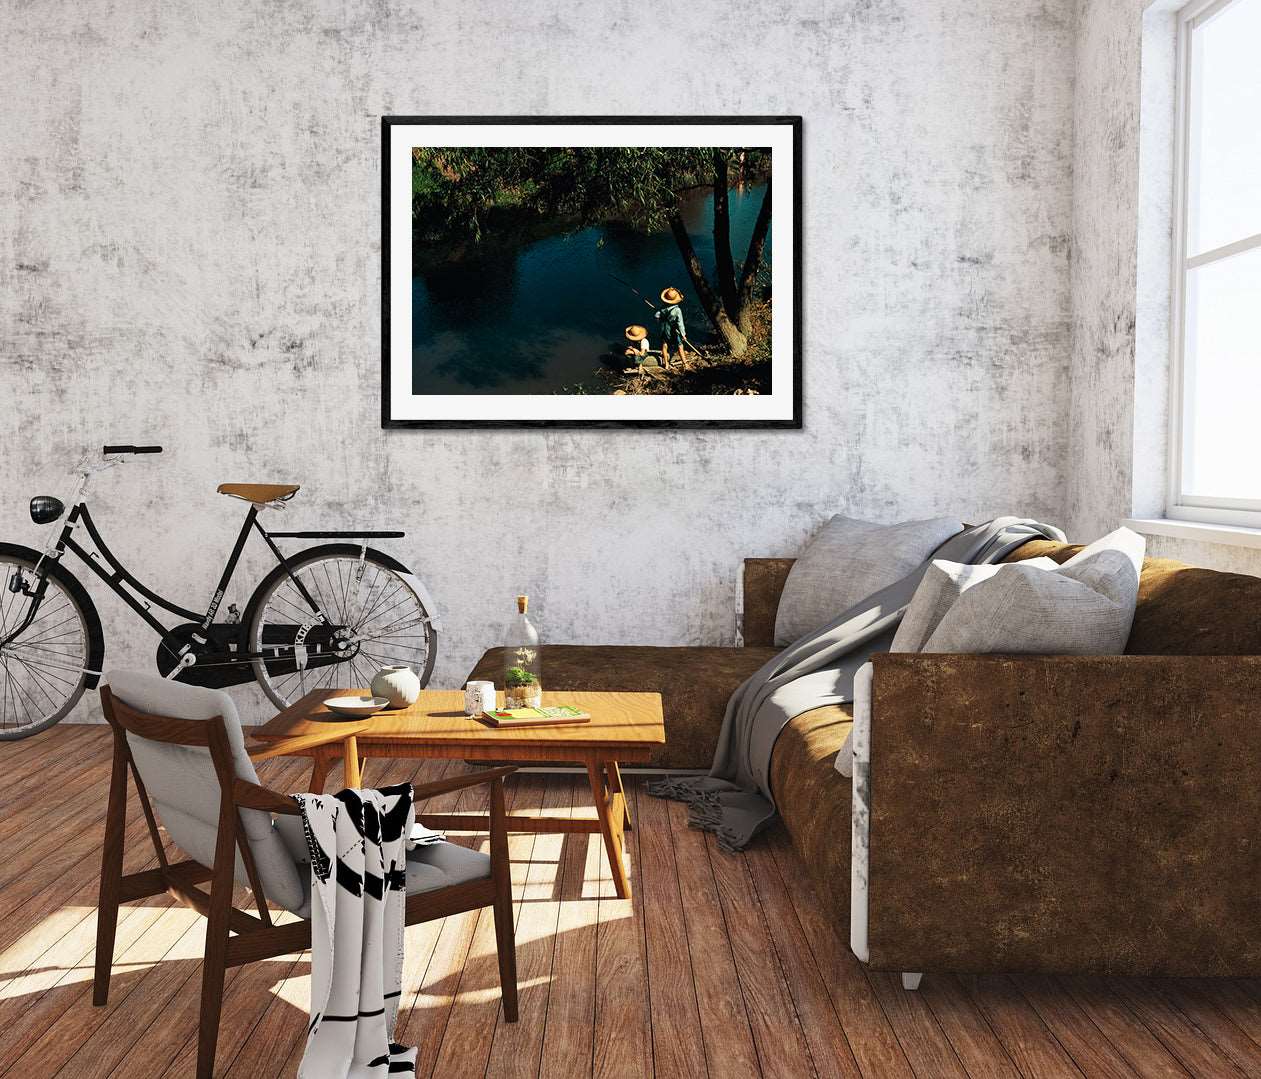 A digitally rendered living room with a framed paper print on the wall